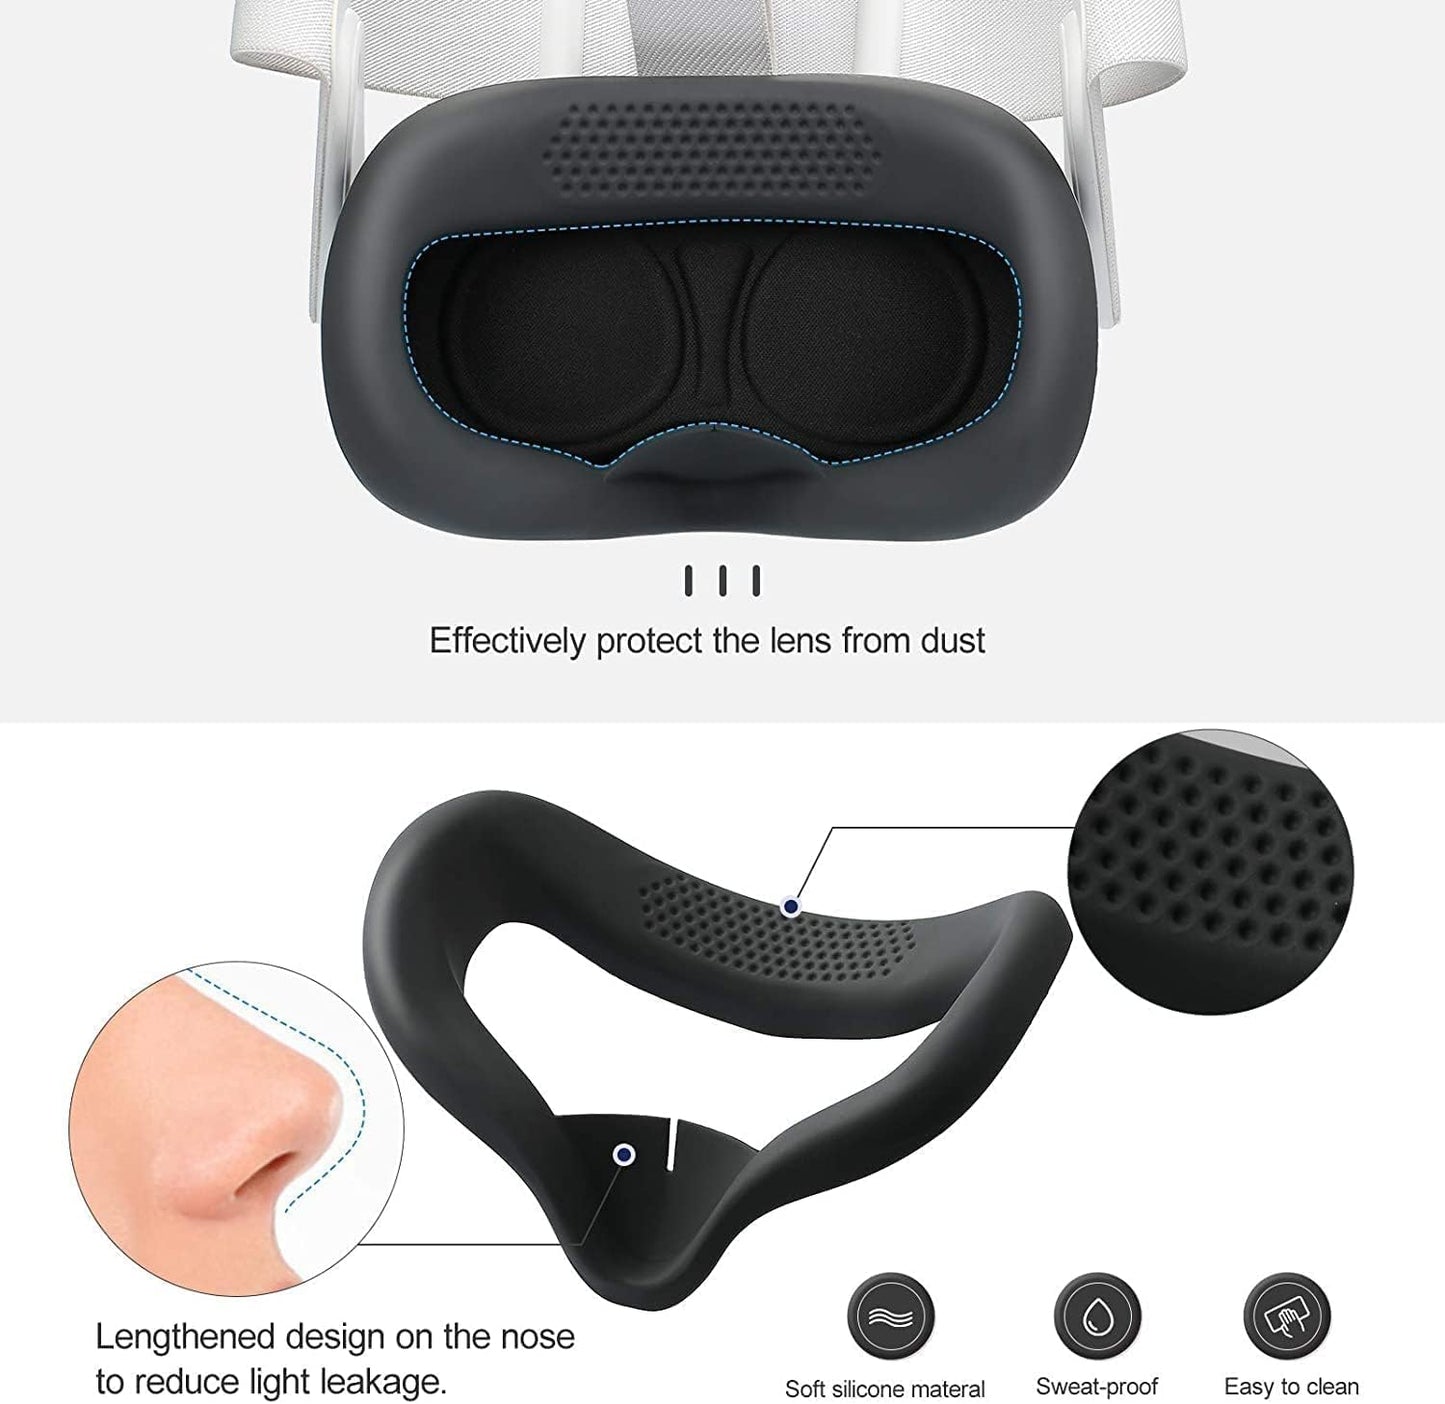 Durable Travel Case Compatible with Meta/Oculus Quest 2 Headset, Storage Bag Accessories with Lens Cap, Silicone Face Cover, Adjustable Straps